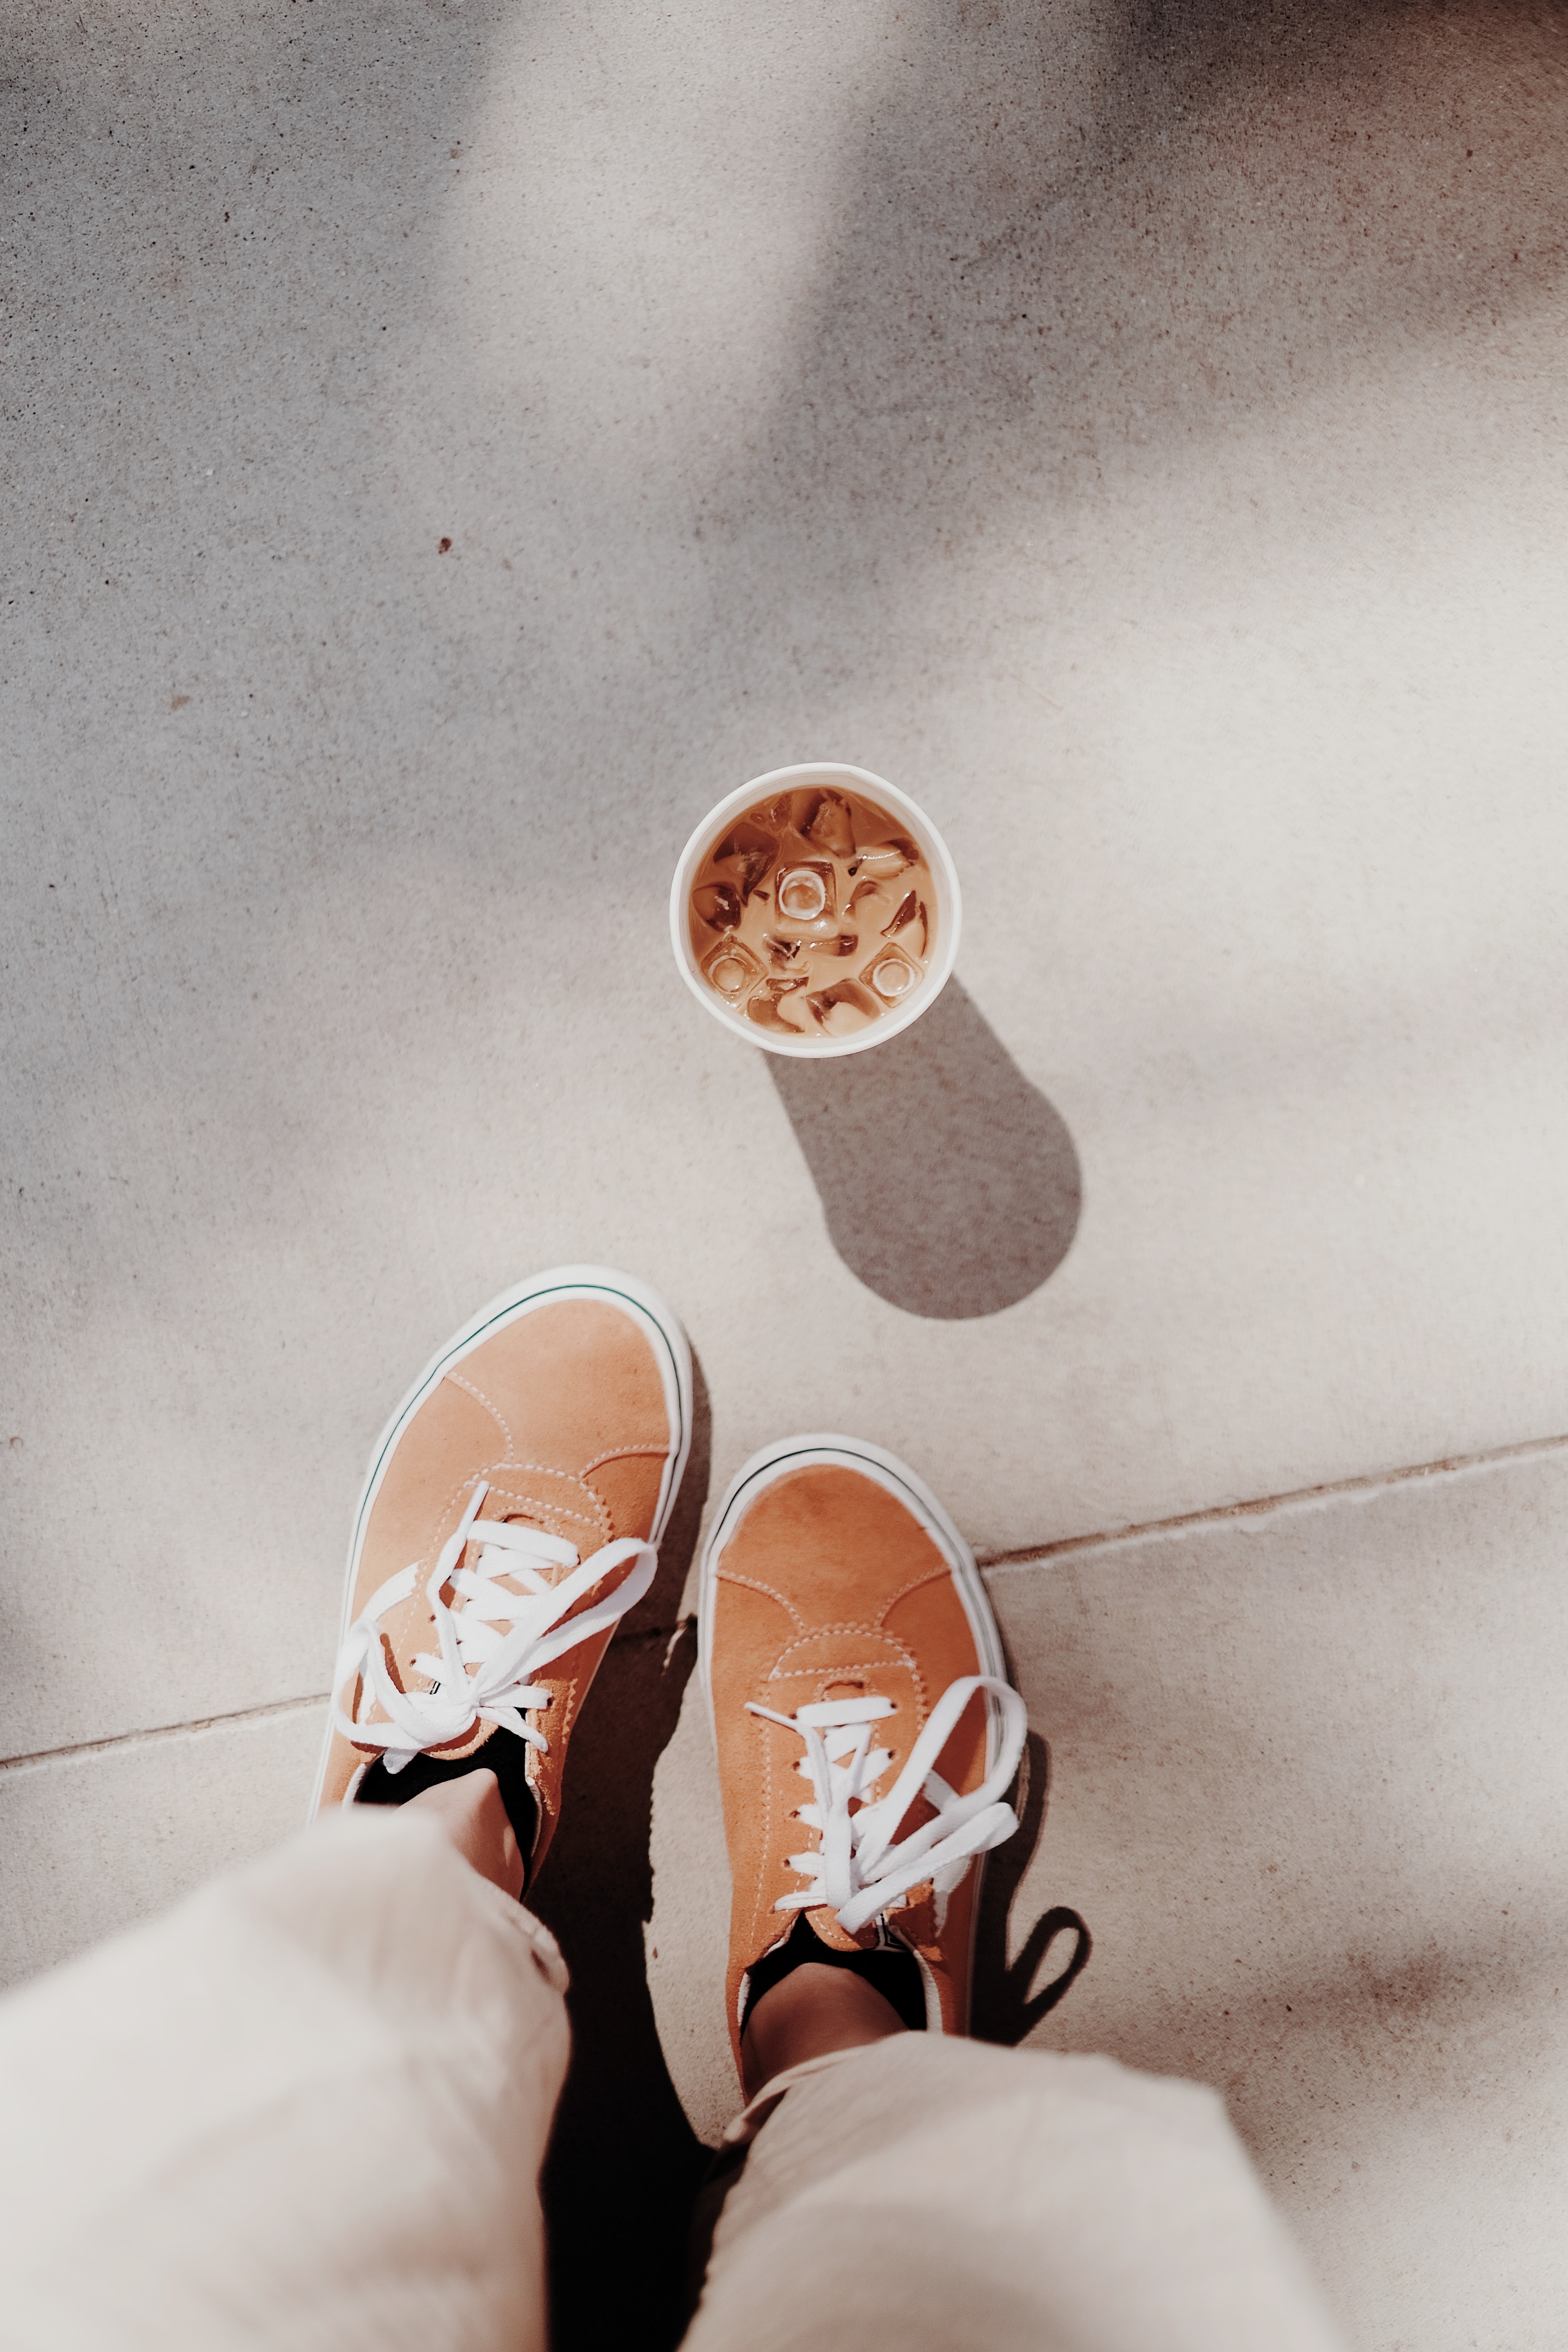 shoes, ice, coffee, miscellanea, miscellaneous, legs, sneakers, drink, beverage